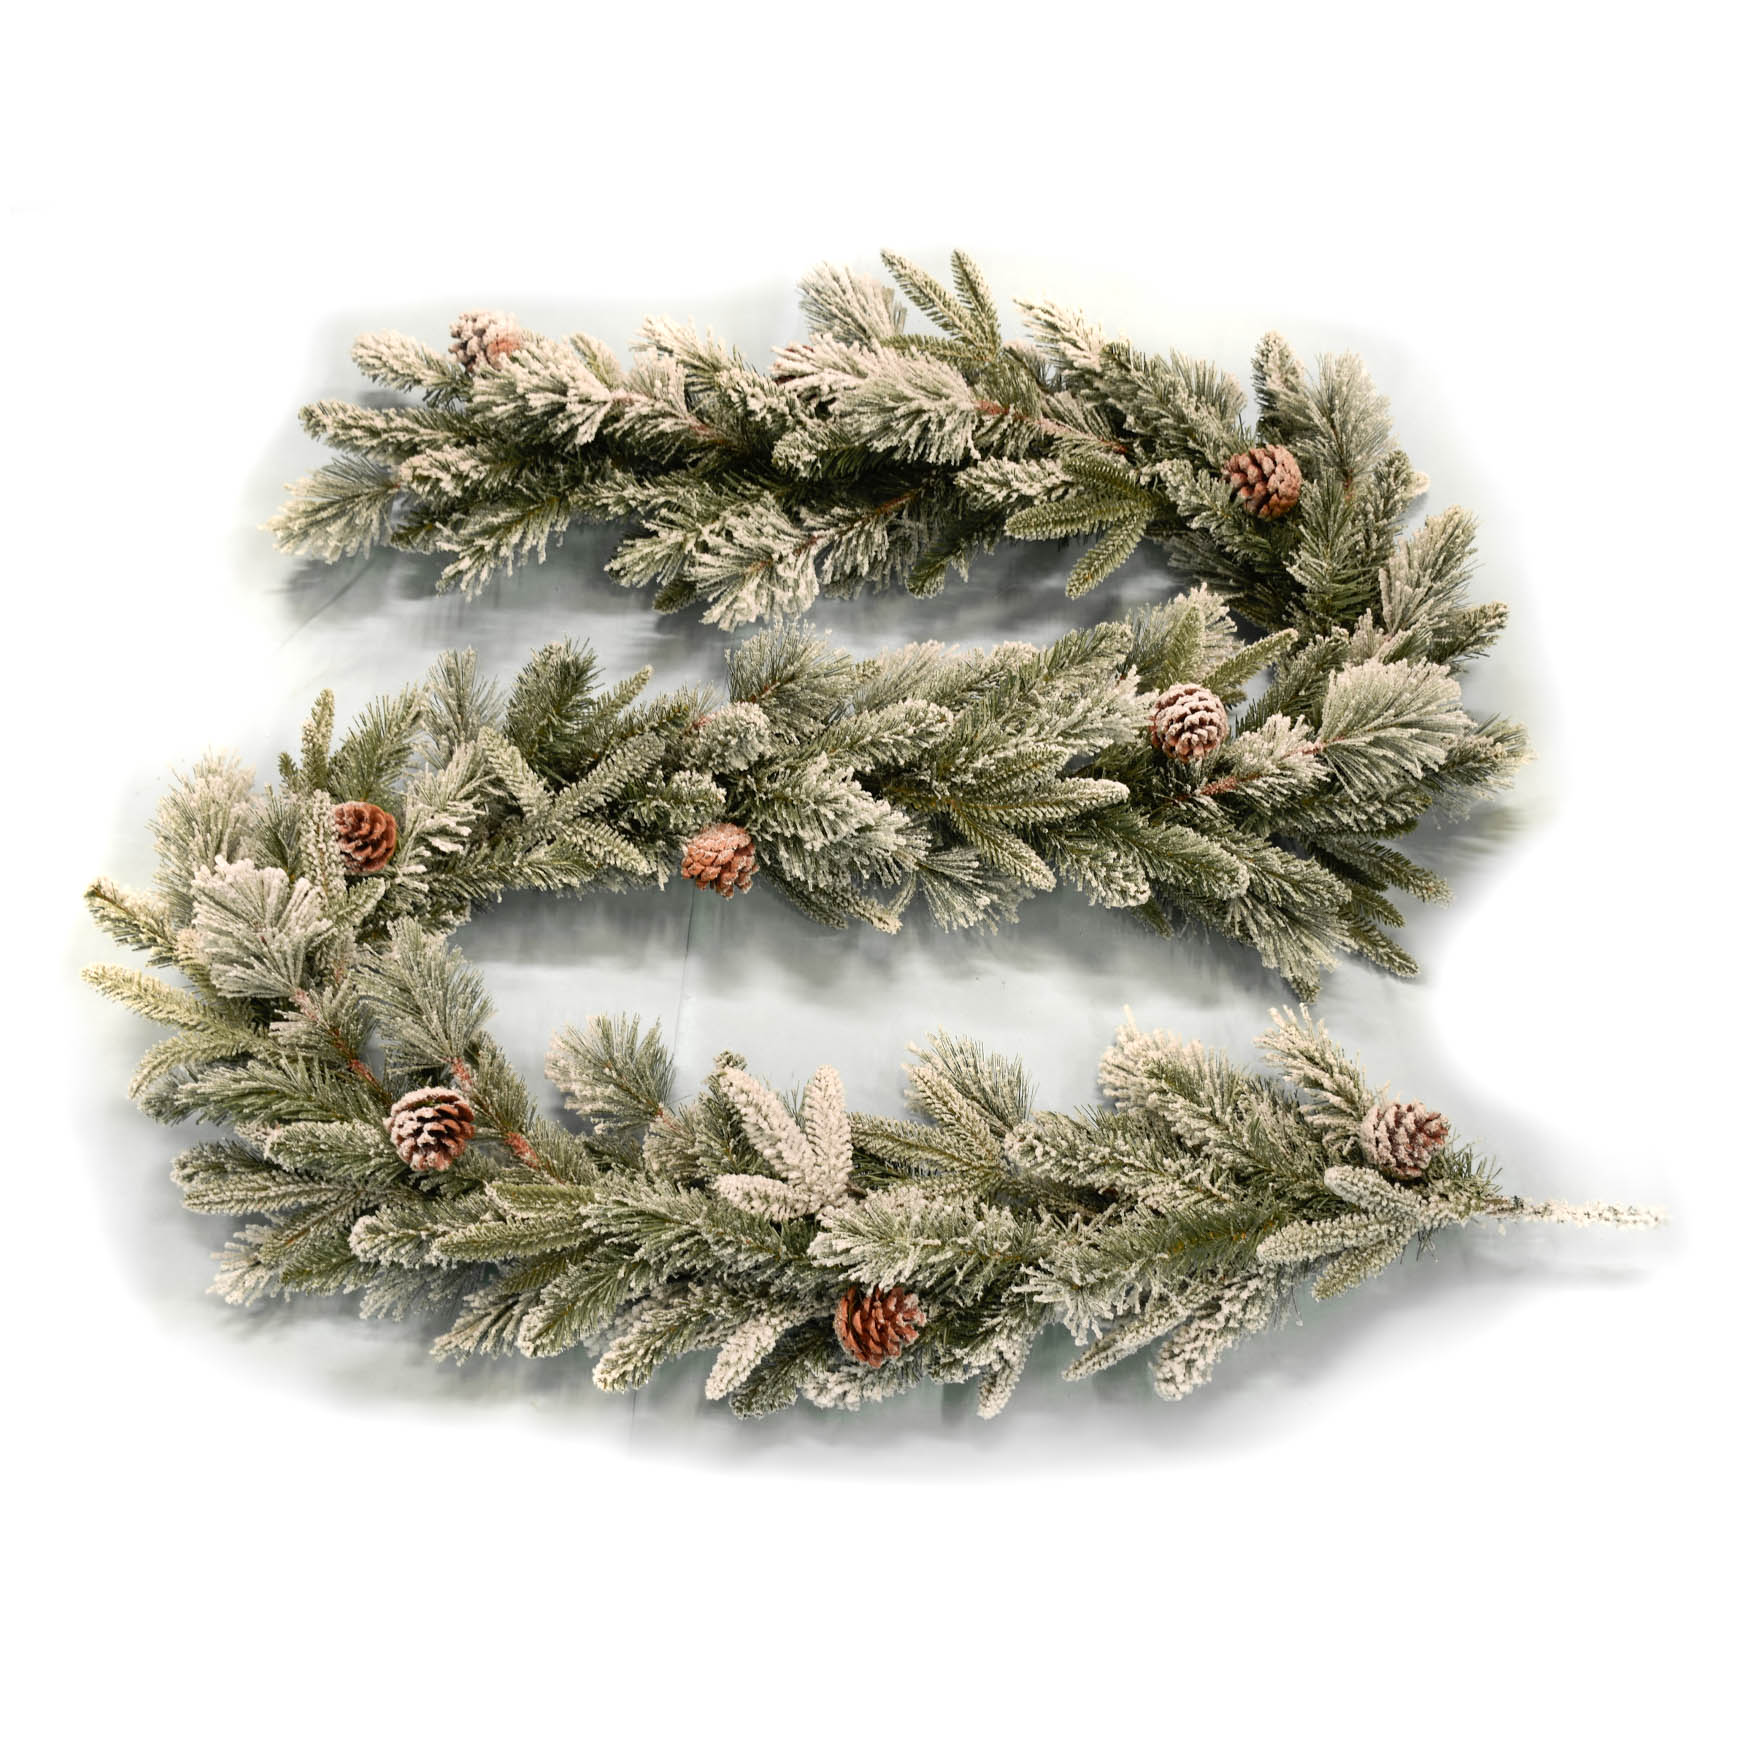 9__x_14___FLOCK_MIXED_ROSE_MARY_AND_EMERALD_ANGEL_GARLAND_WITH_PINE_CONES.jpg